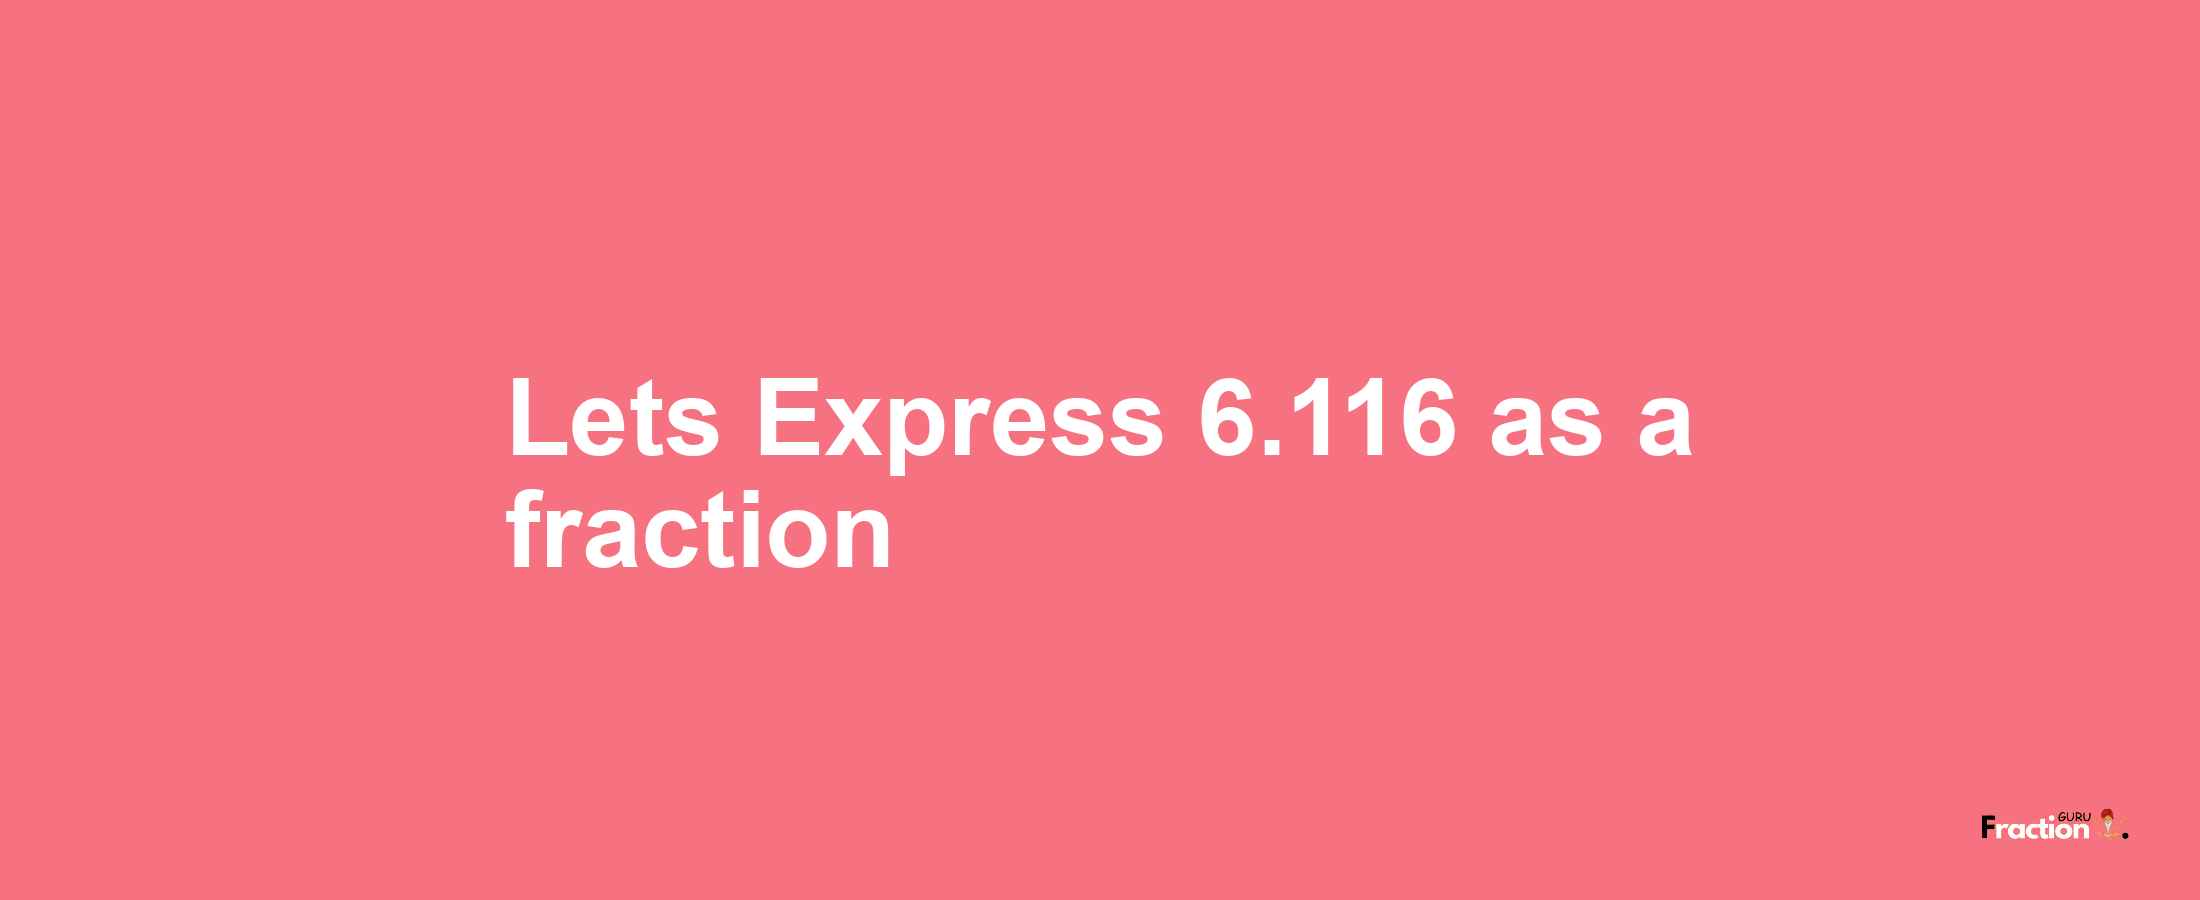 Lets Express 6.116 as afraction